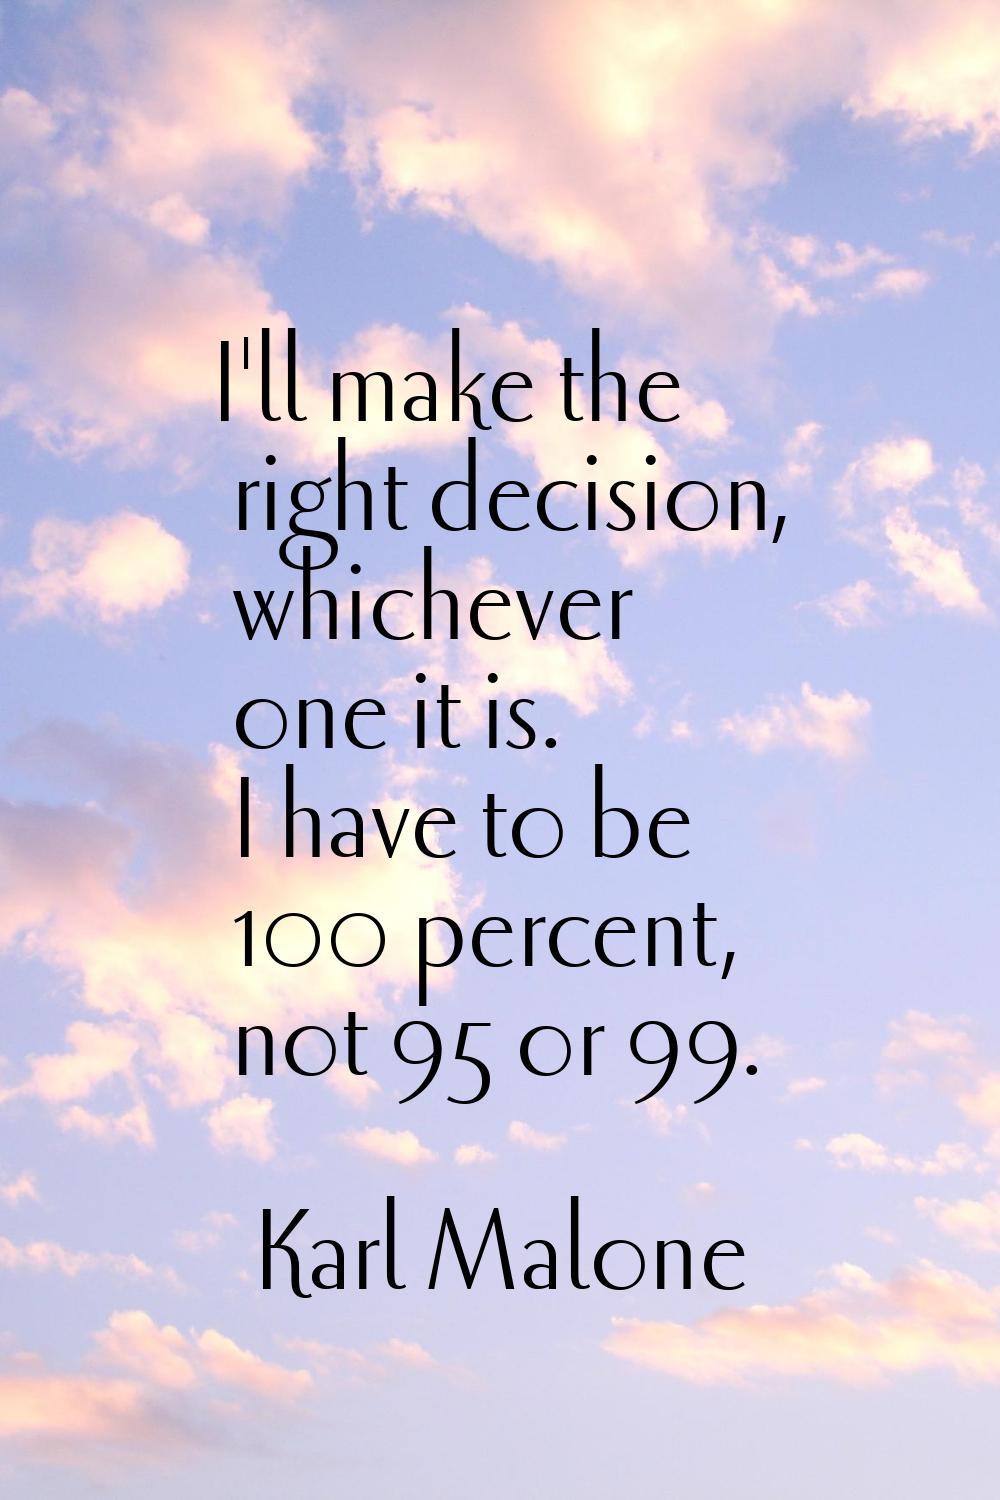 I'll make the right decision, whichever one it is. I have to be 100 percent, not 95 or 99.